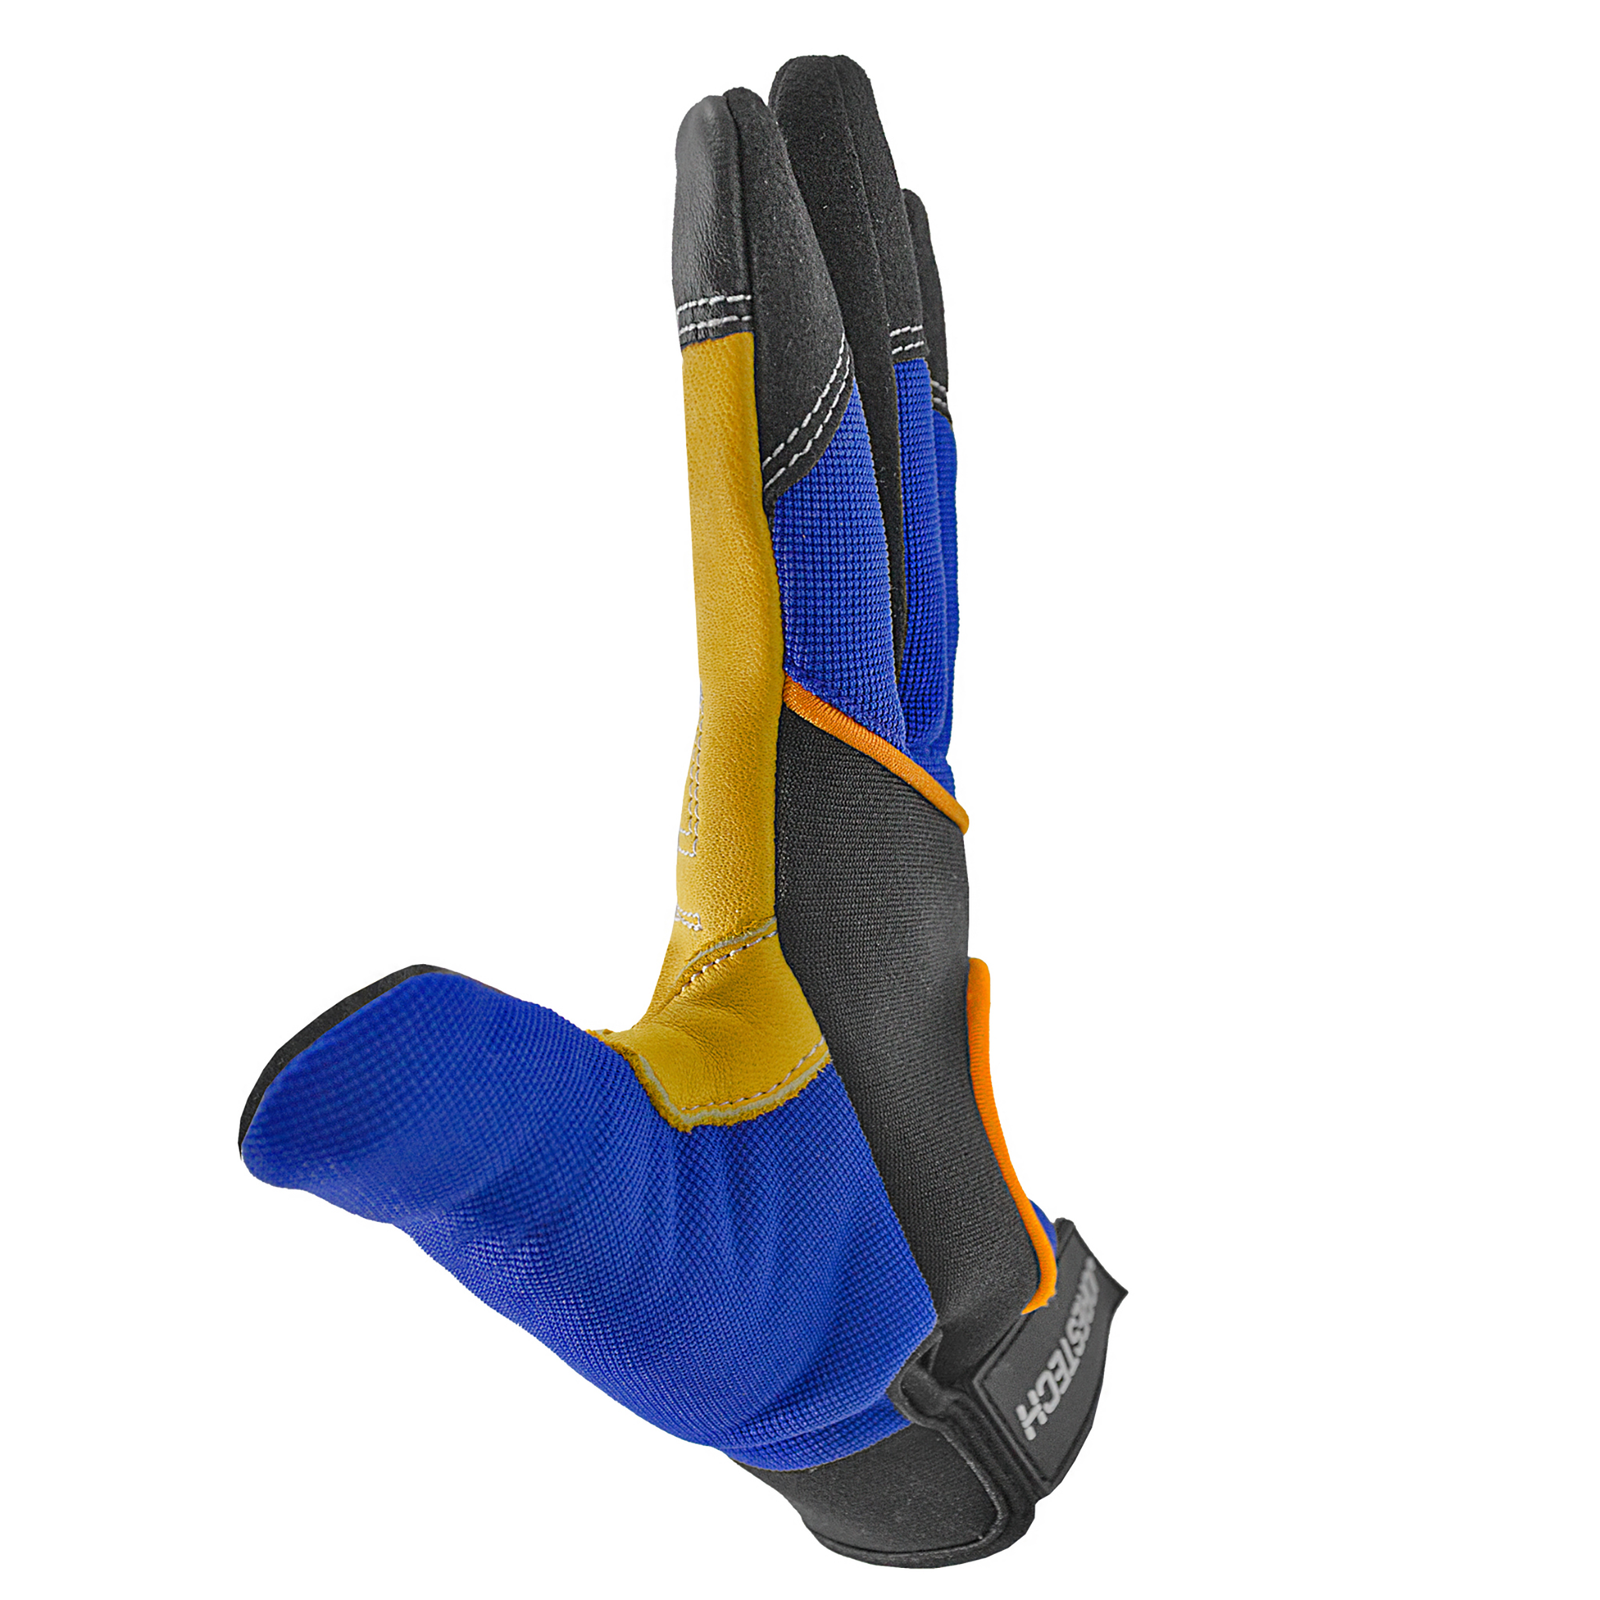 Side of 1 blue touchscreen JORESTECH safety work glove with leather palms